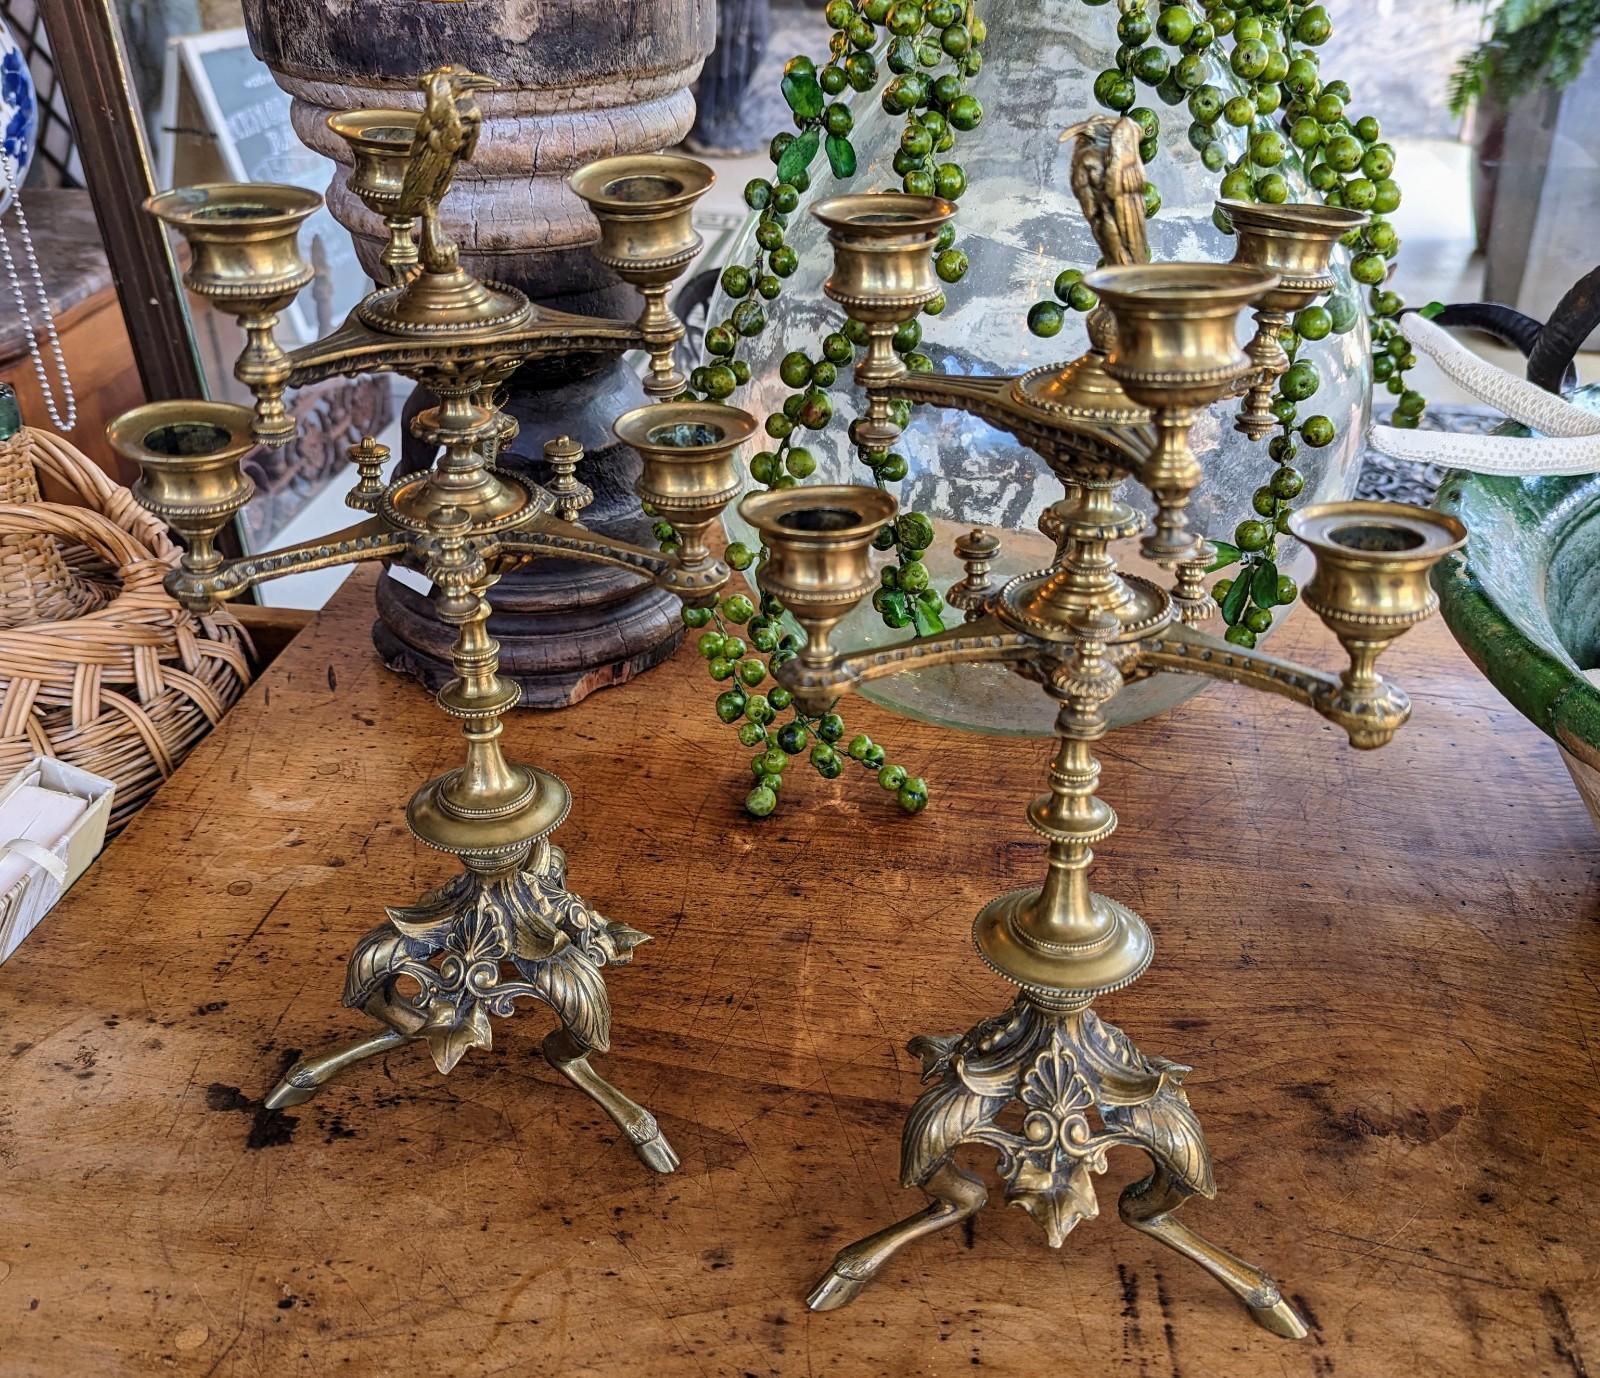 Pair of Antique Candelabras, 19th Century European Brass Candlesticks Footed For Sale 5